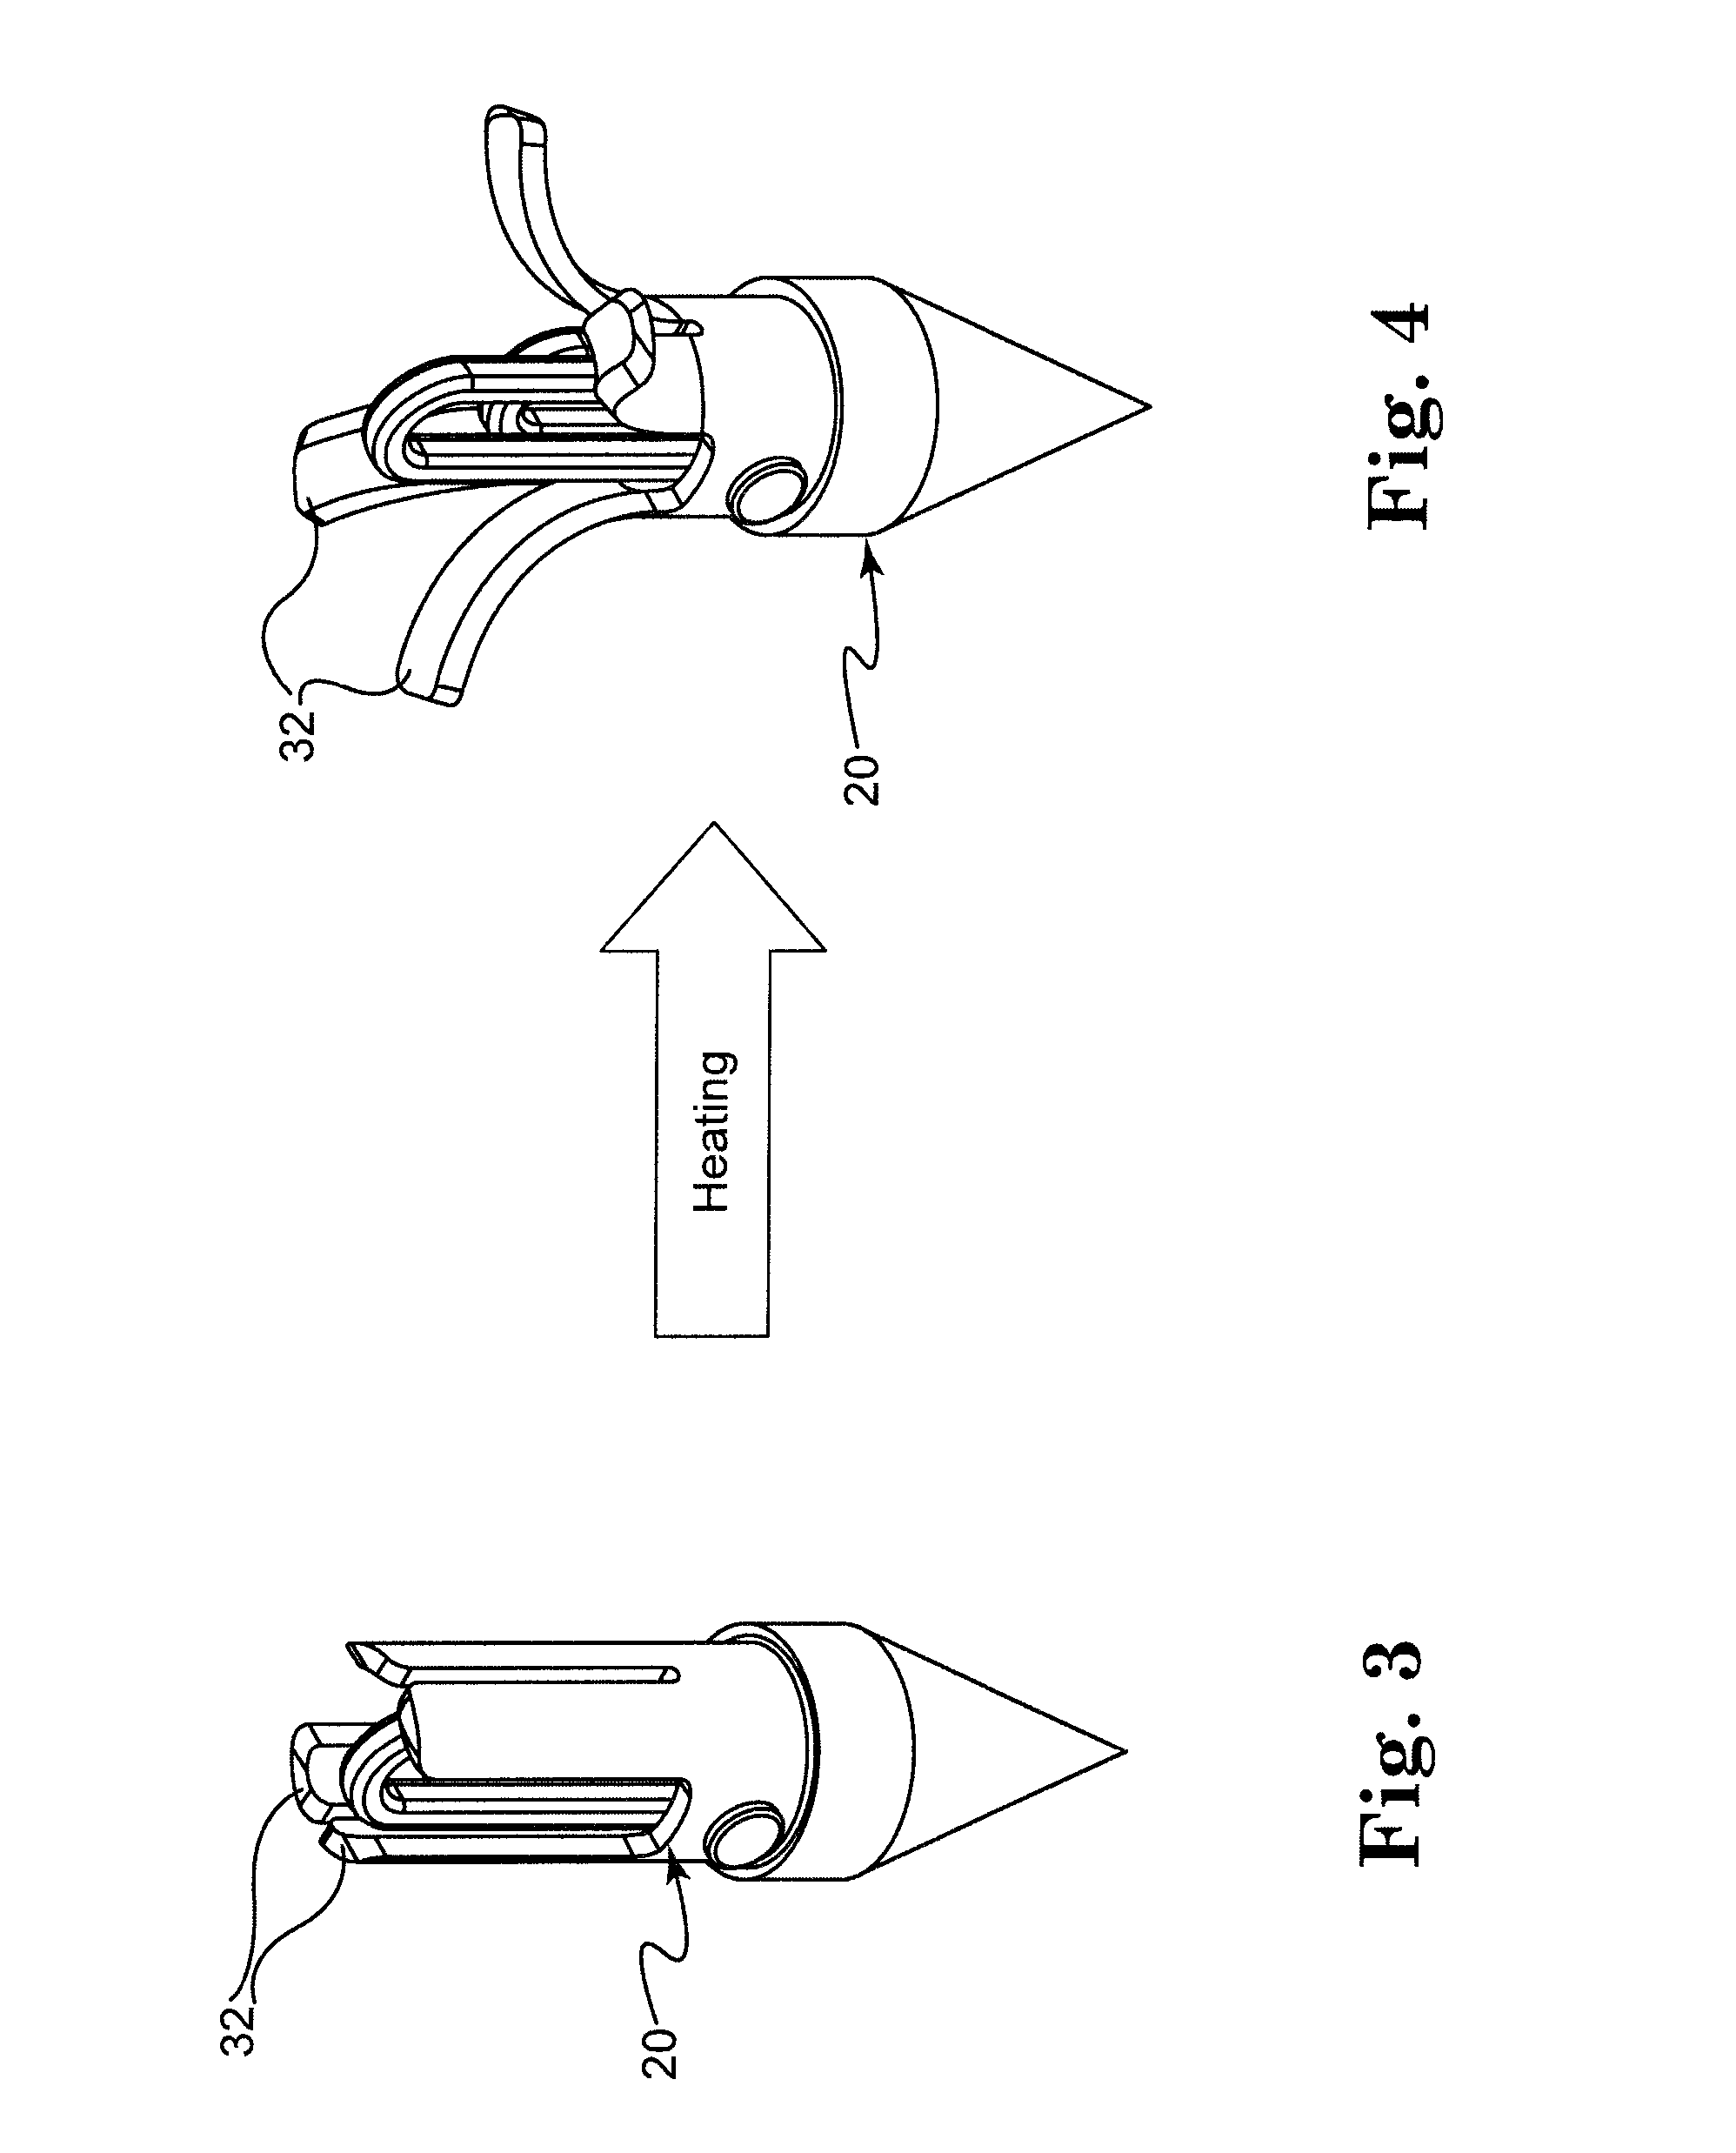 Bone anchor comprising a shape memory element and utilizing temperature transition to secure the bone anchor in bone